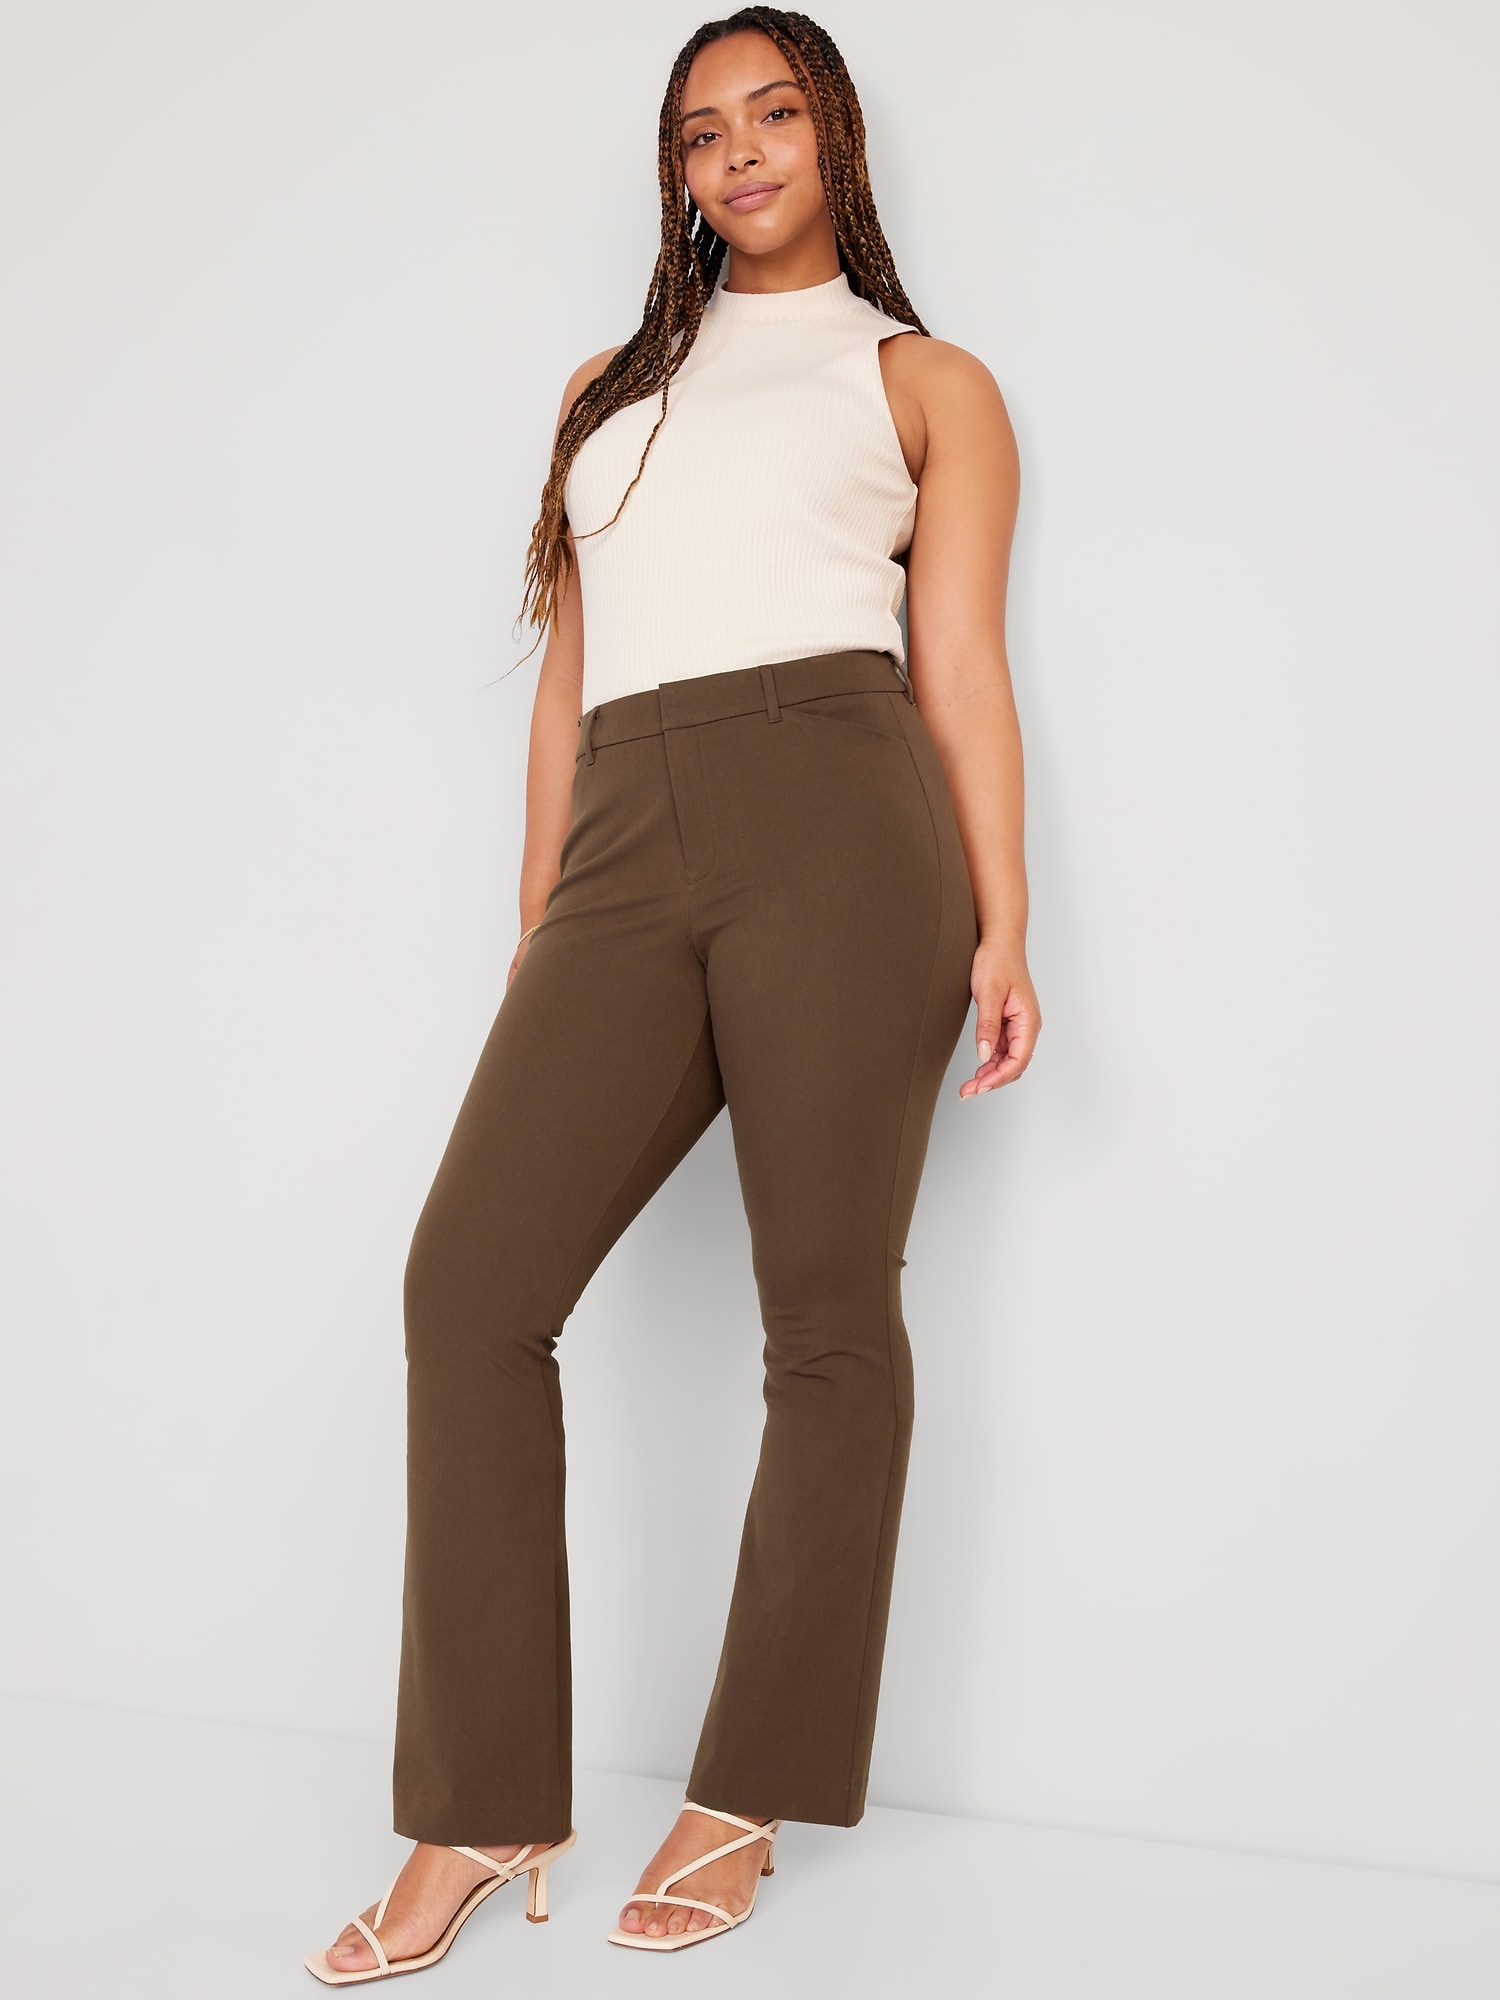 Yoga Fitness Bell Bottoms Woman Pants Slim Fitting High Waisted Streetwear  Casual Flare Pants with Pocket Clothes Full Length Capris Trousers - China  Yoga and Gym price | Made-in-China.com